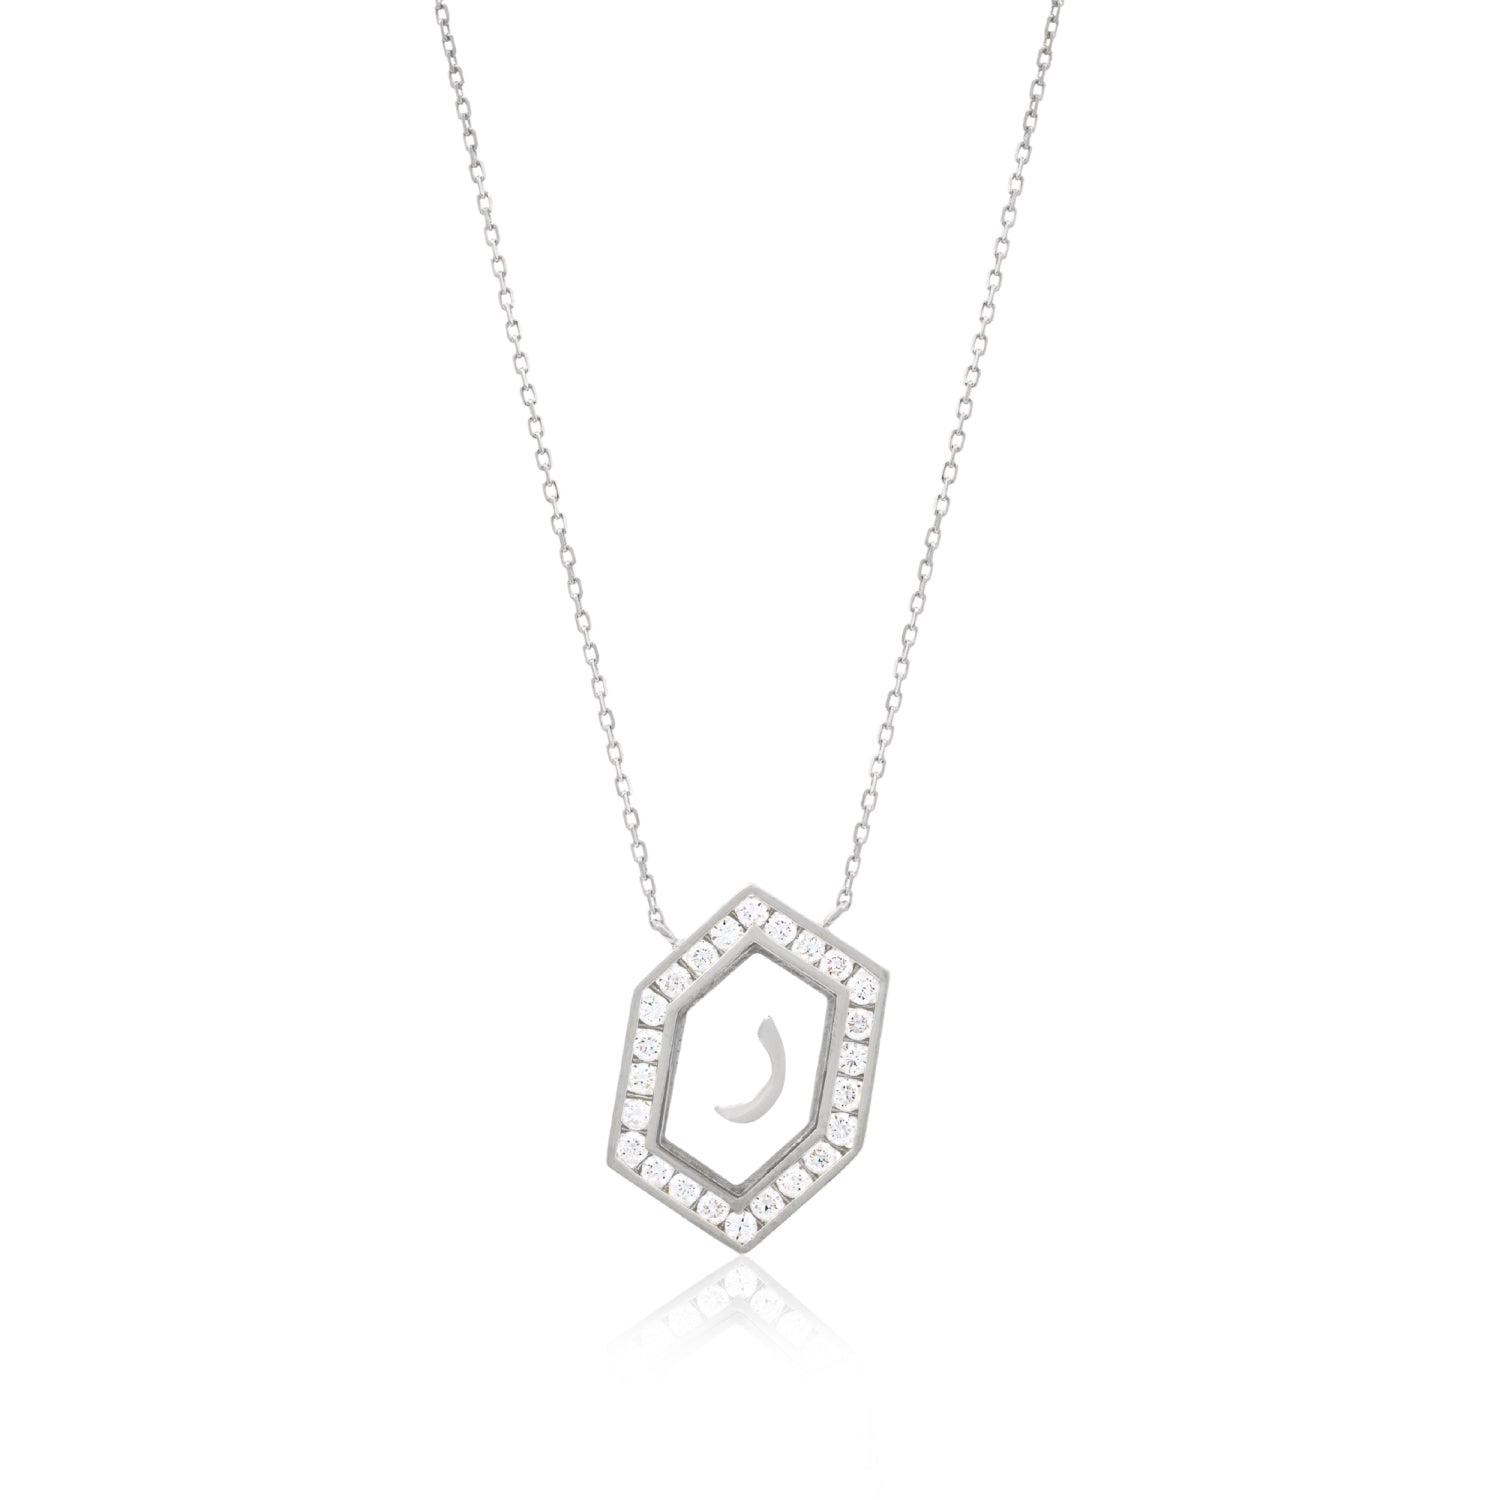 Qamoos 1.0 Letter ر Diamond Necklace in White Gold